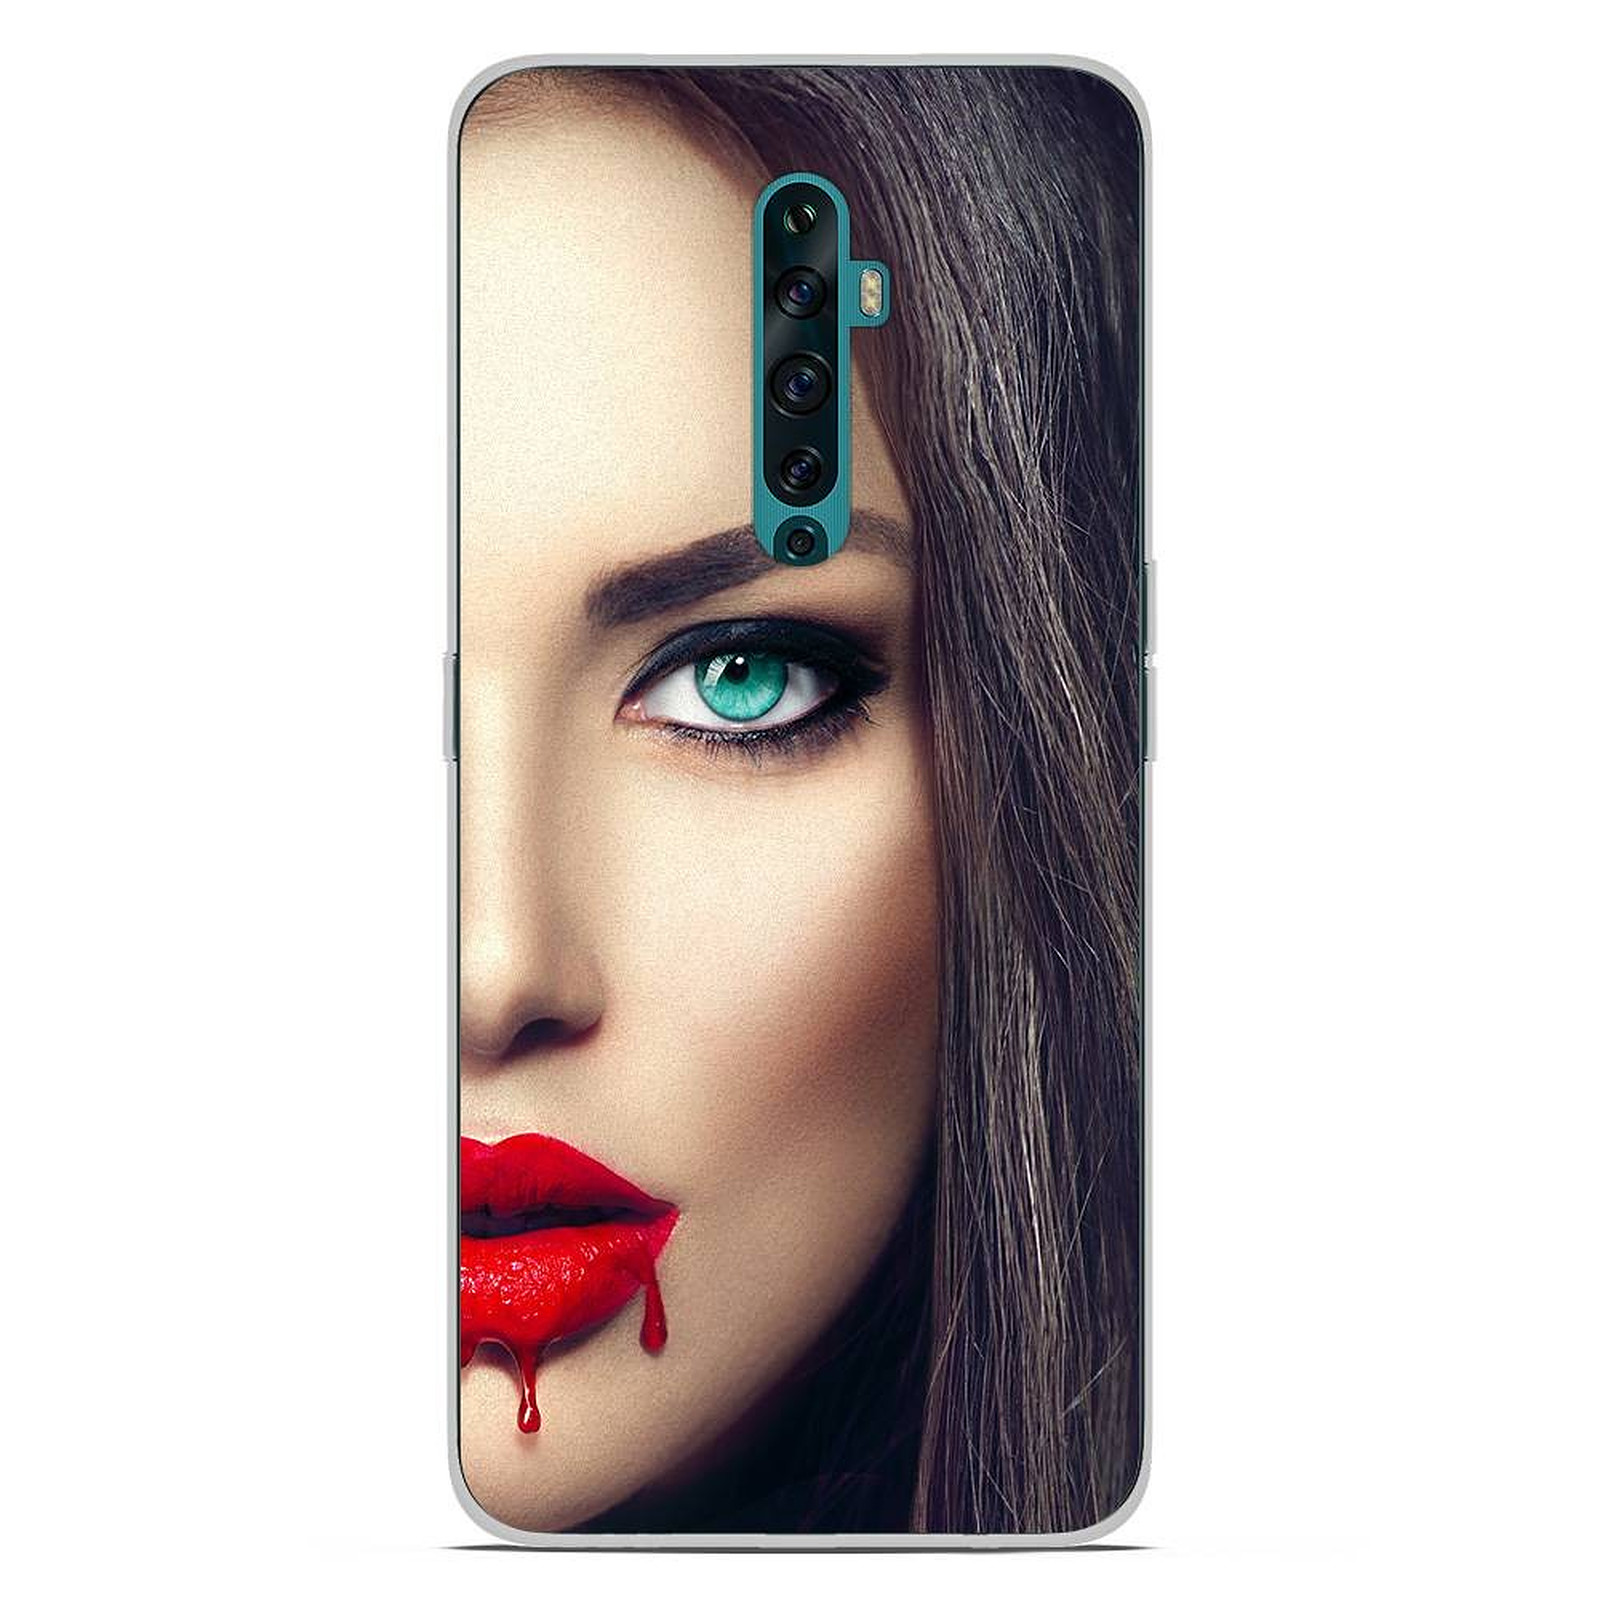 1001 Coques Coque silicone gel Oppo Reno 2Z motif Lèvres Sang - Coque telephone 1001Coques